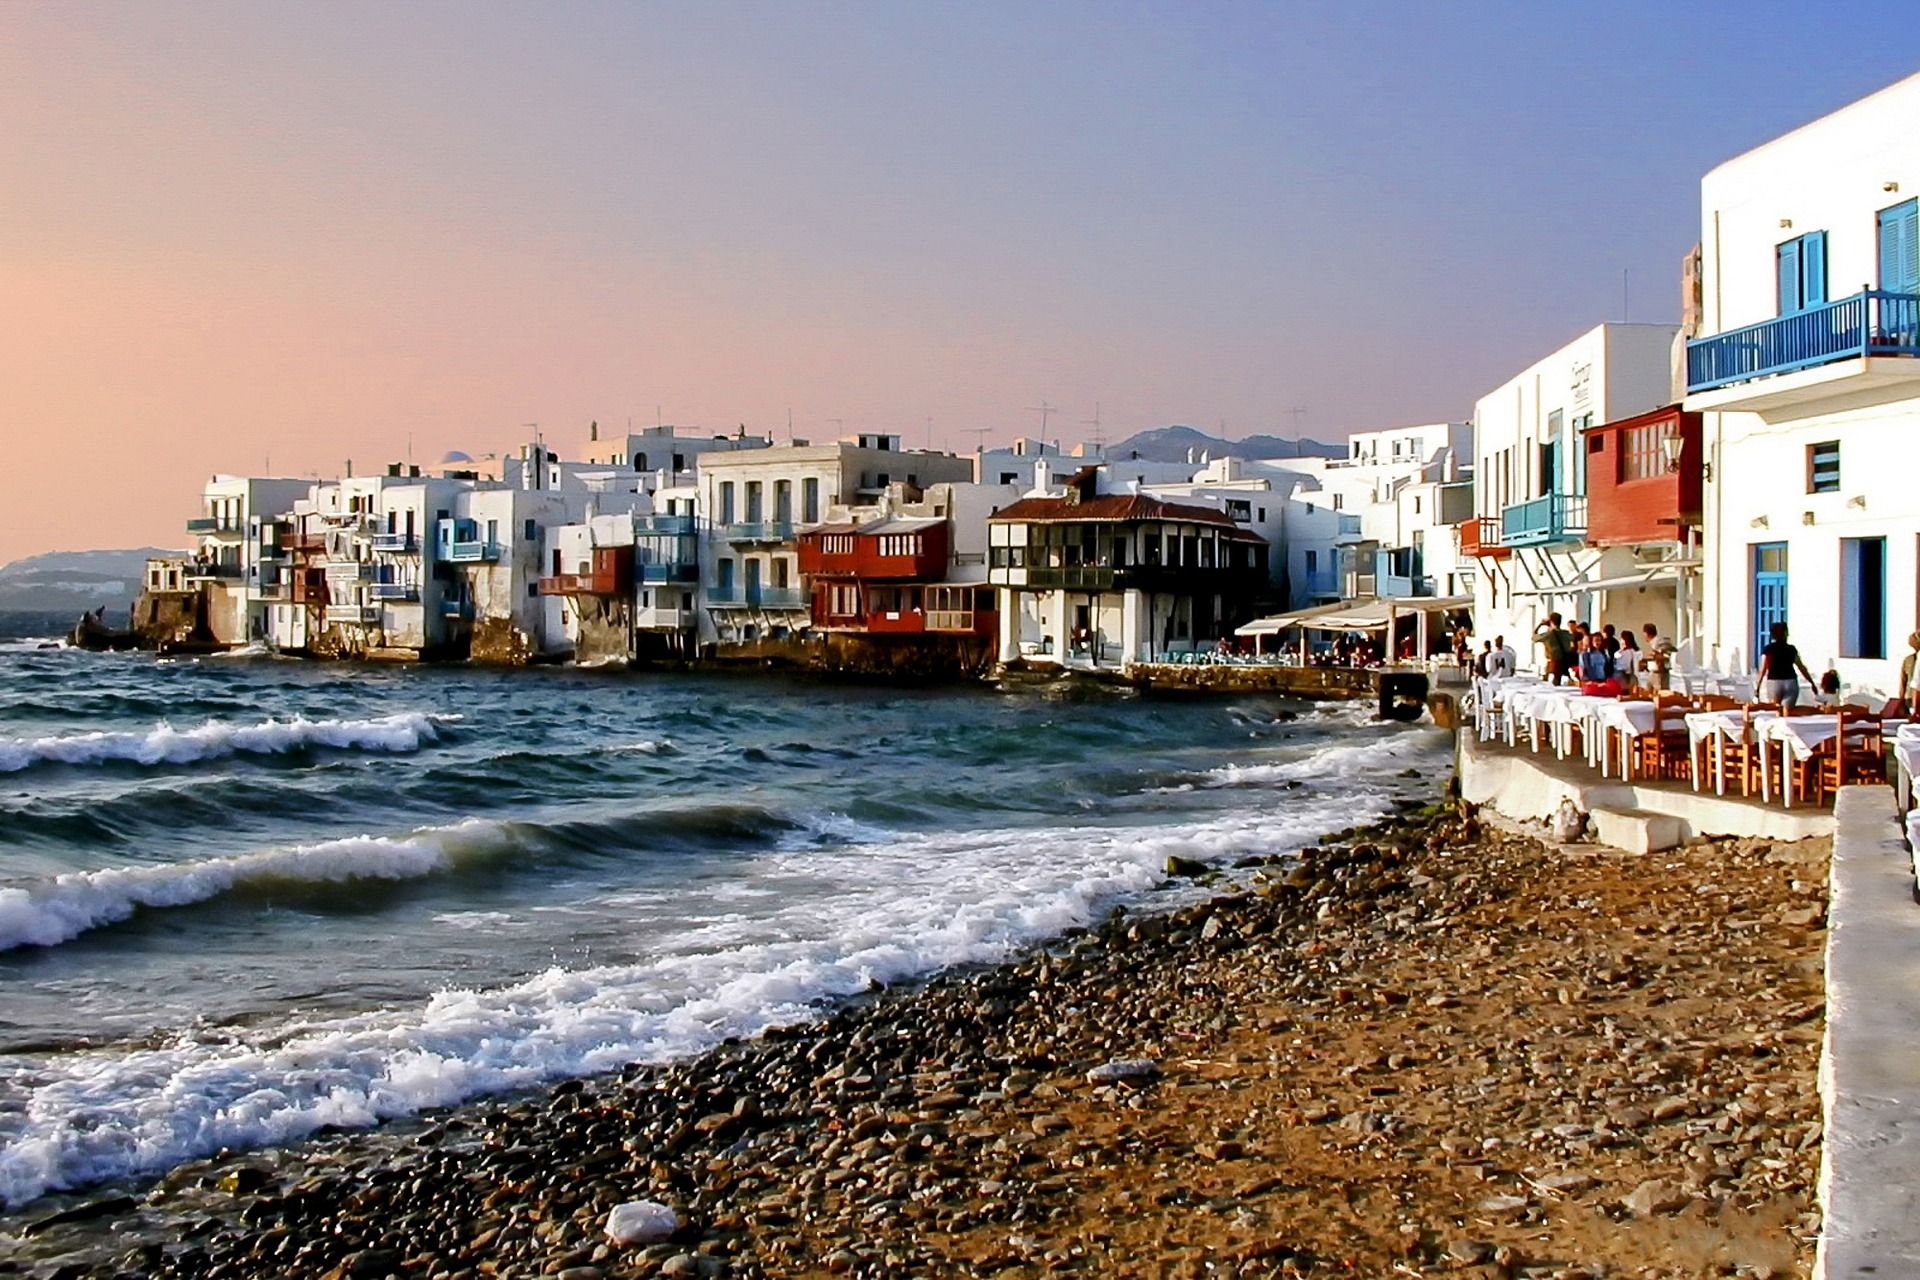 The Greek island of Mykonos is popular with American travelers this summer